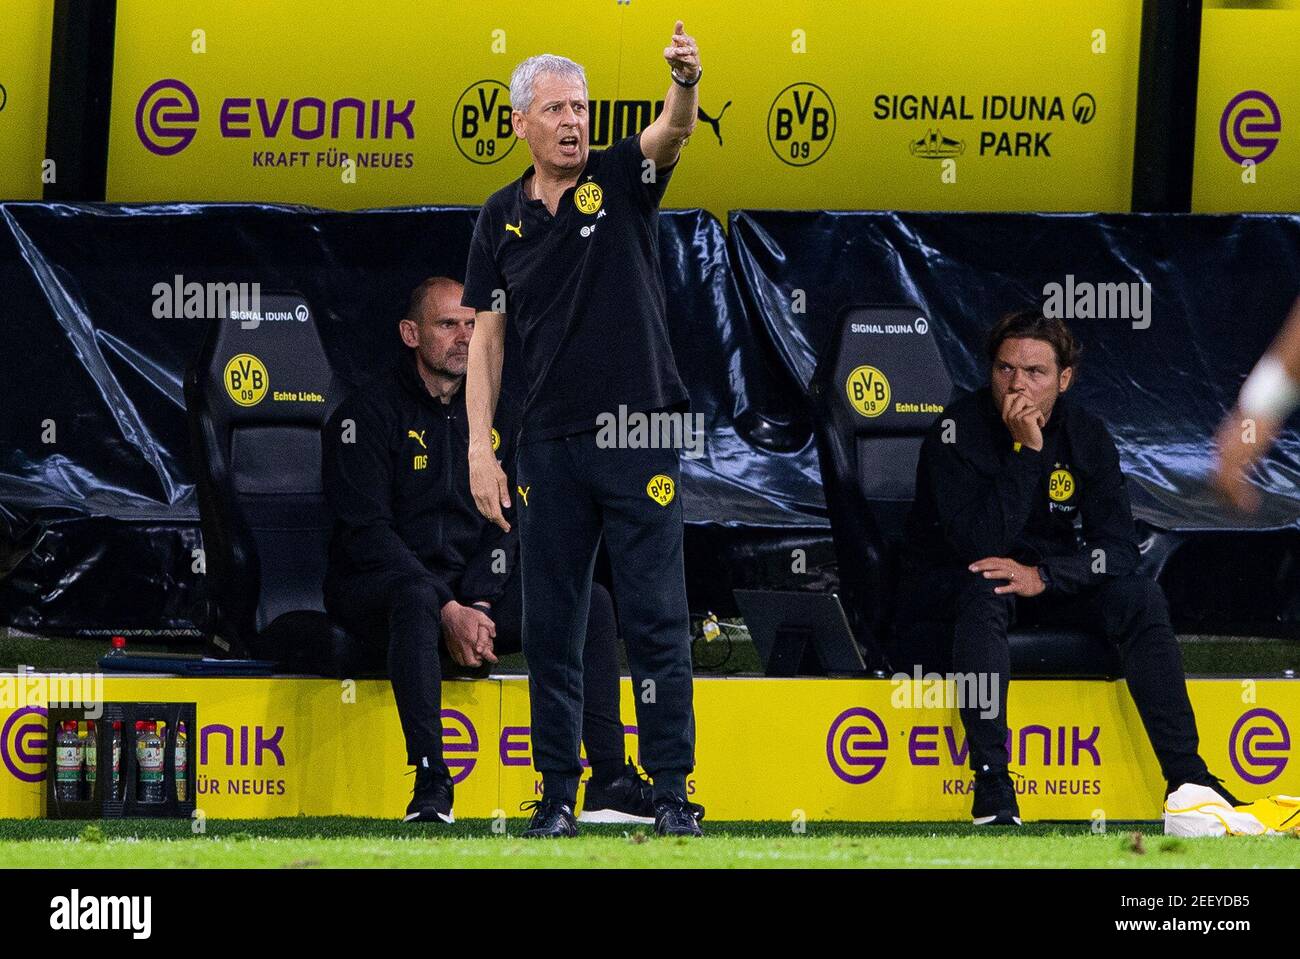 Soccer Football - Bundesliga - Borussia Dortmund v 1. FSV Mainz 05 - Signal Iduna Park, Dortmund, Germany - June 17, 2020 Dortmund coach Lucien Favre during the match, following the resumption of play behind closed doors after the outbreak of the coronavirus disease (COVID-19) Guido Kirchner/Pool via REUTERS  DFL regulations prohibit any use of photographs as image sequences and/or quasi-video Stock Photo